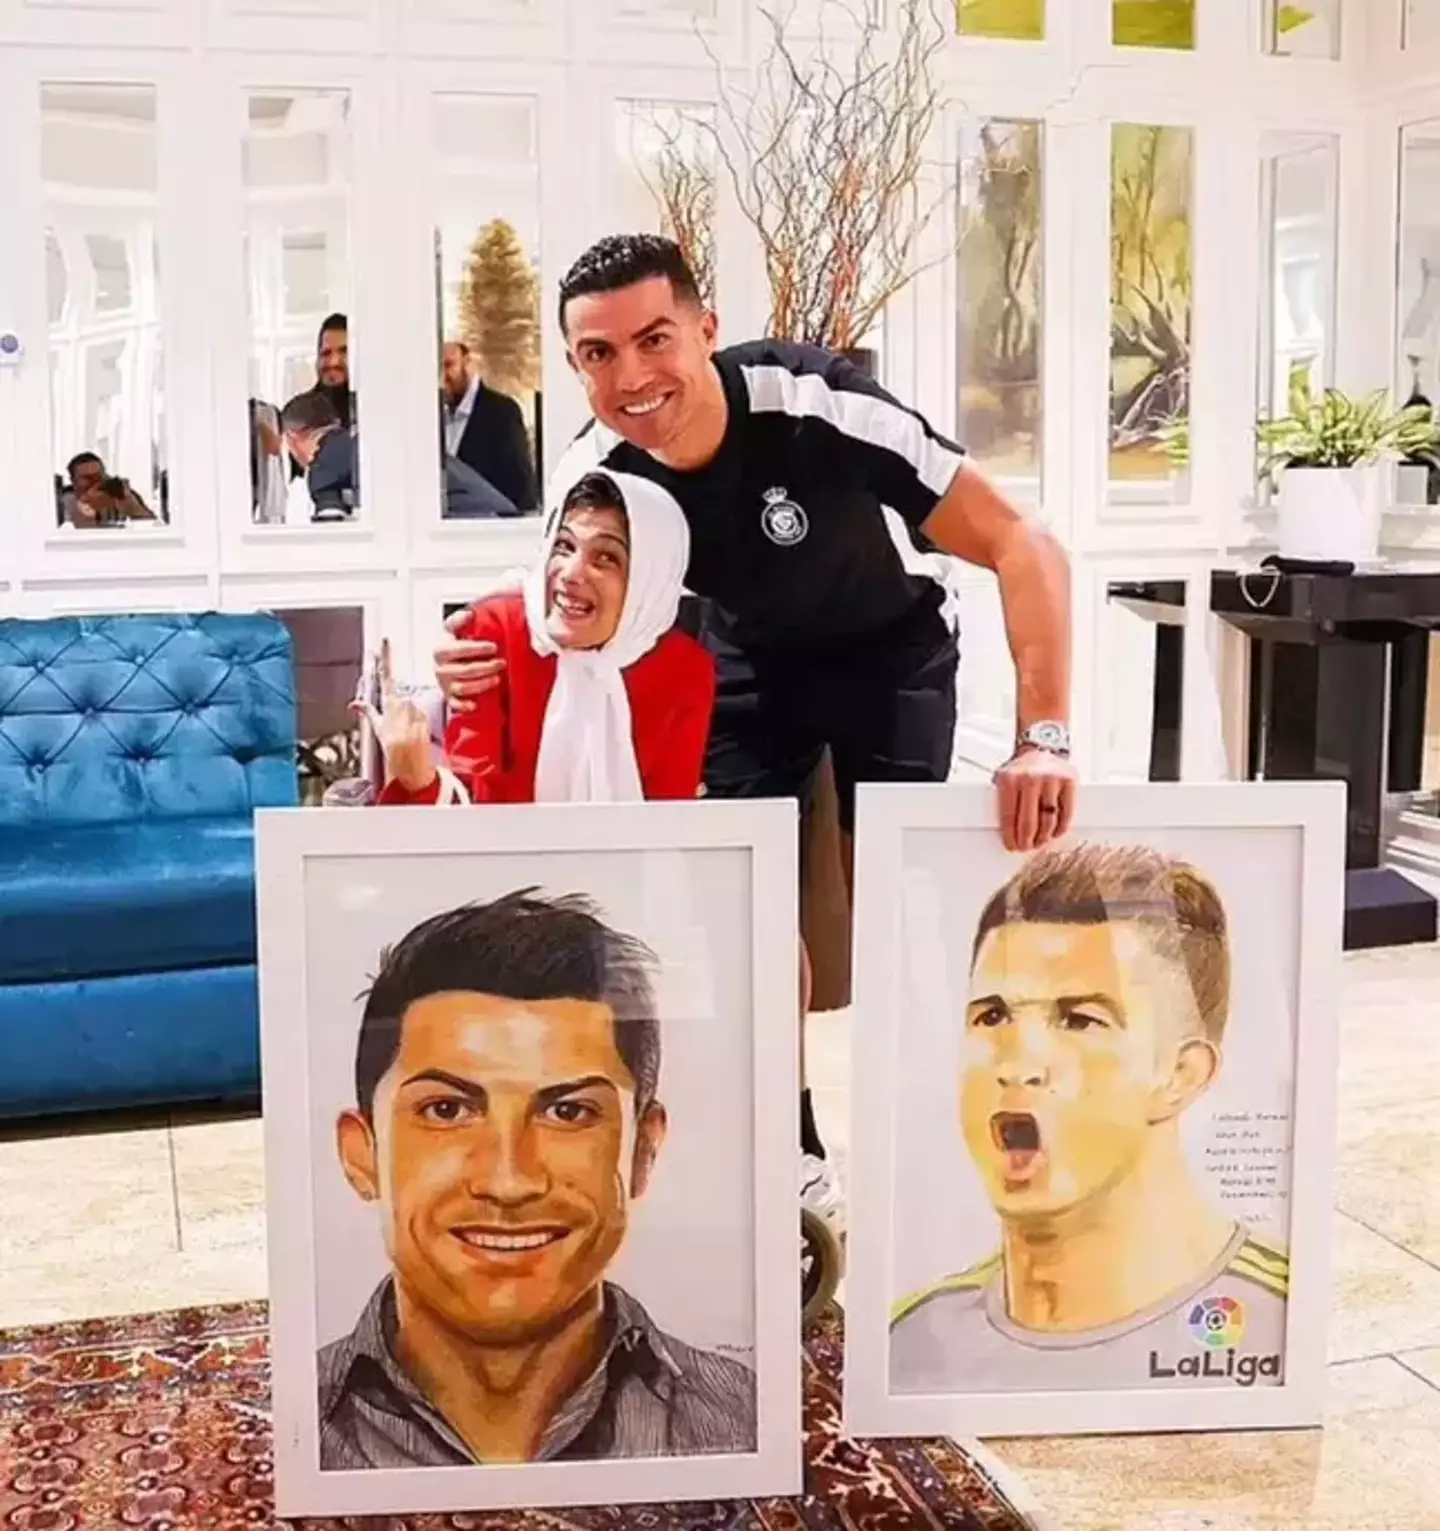 Ronaldo is in trouble for putting his arm around a painter to pose for a photo together.